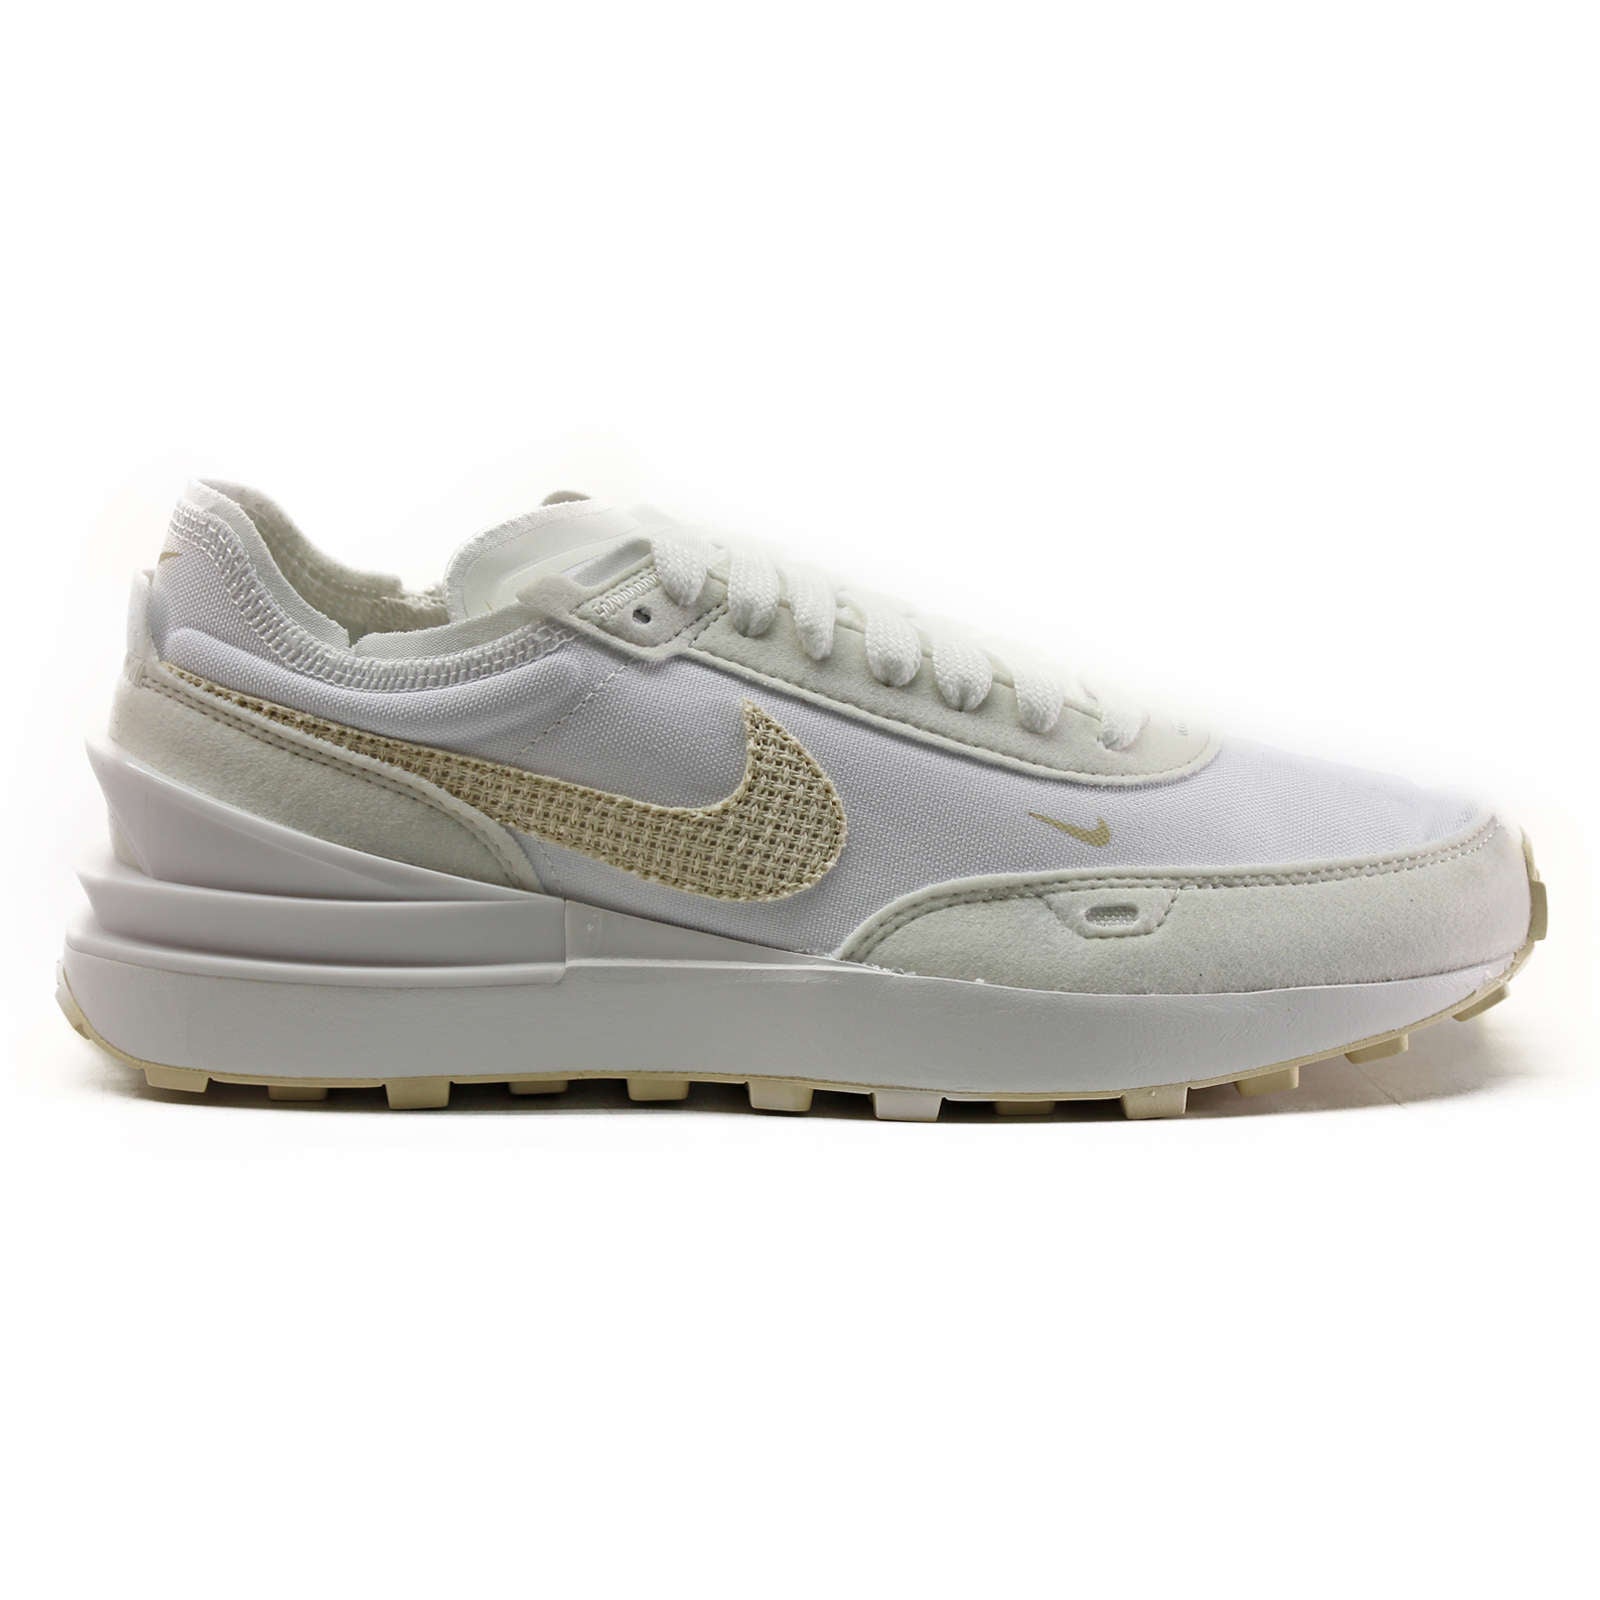 Nike Waffle One ESS Leather Textile Women's Low-Top Sneakers#color_summit white fossil